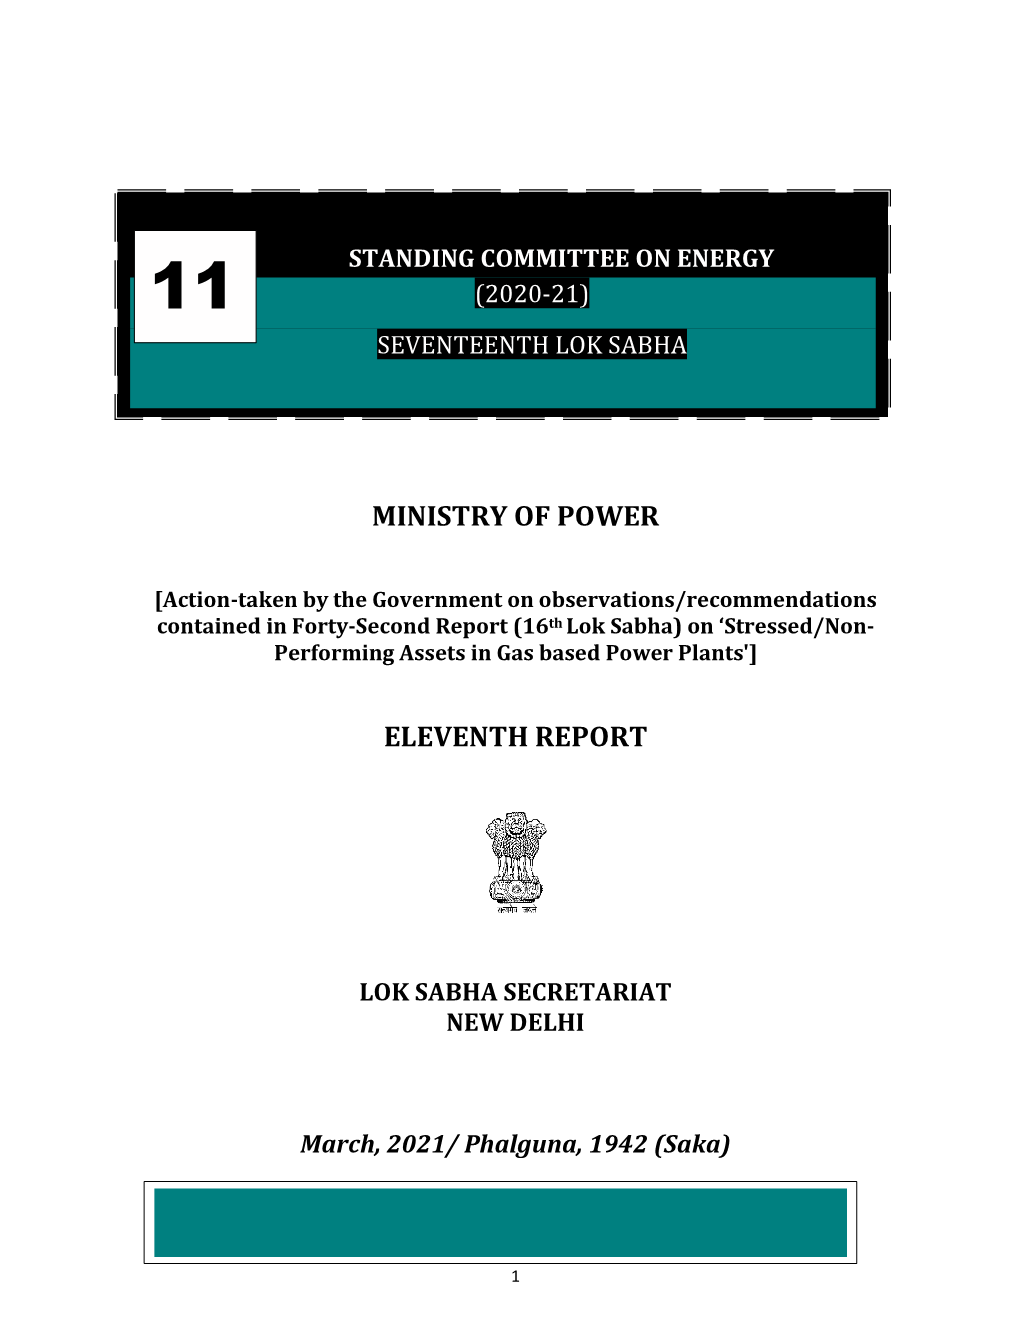 Ministry of Power Eleventh Report